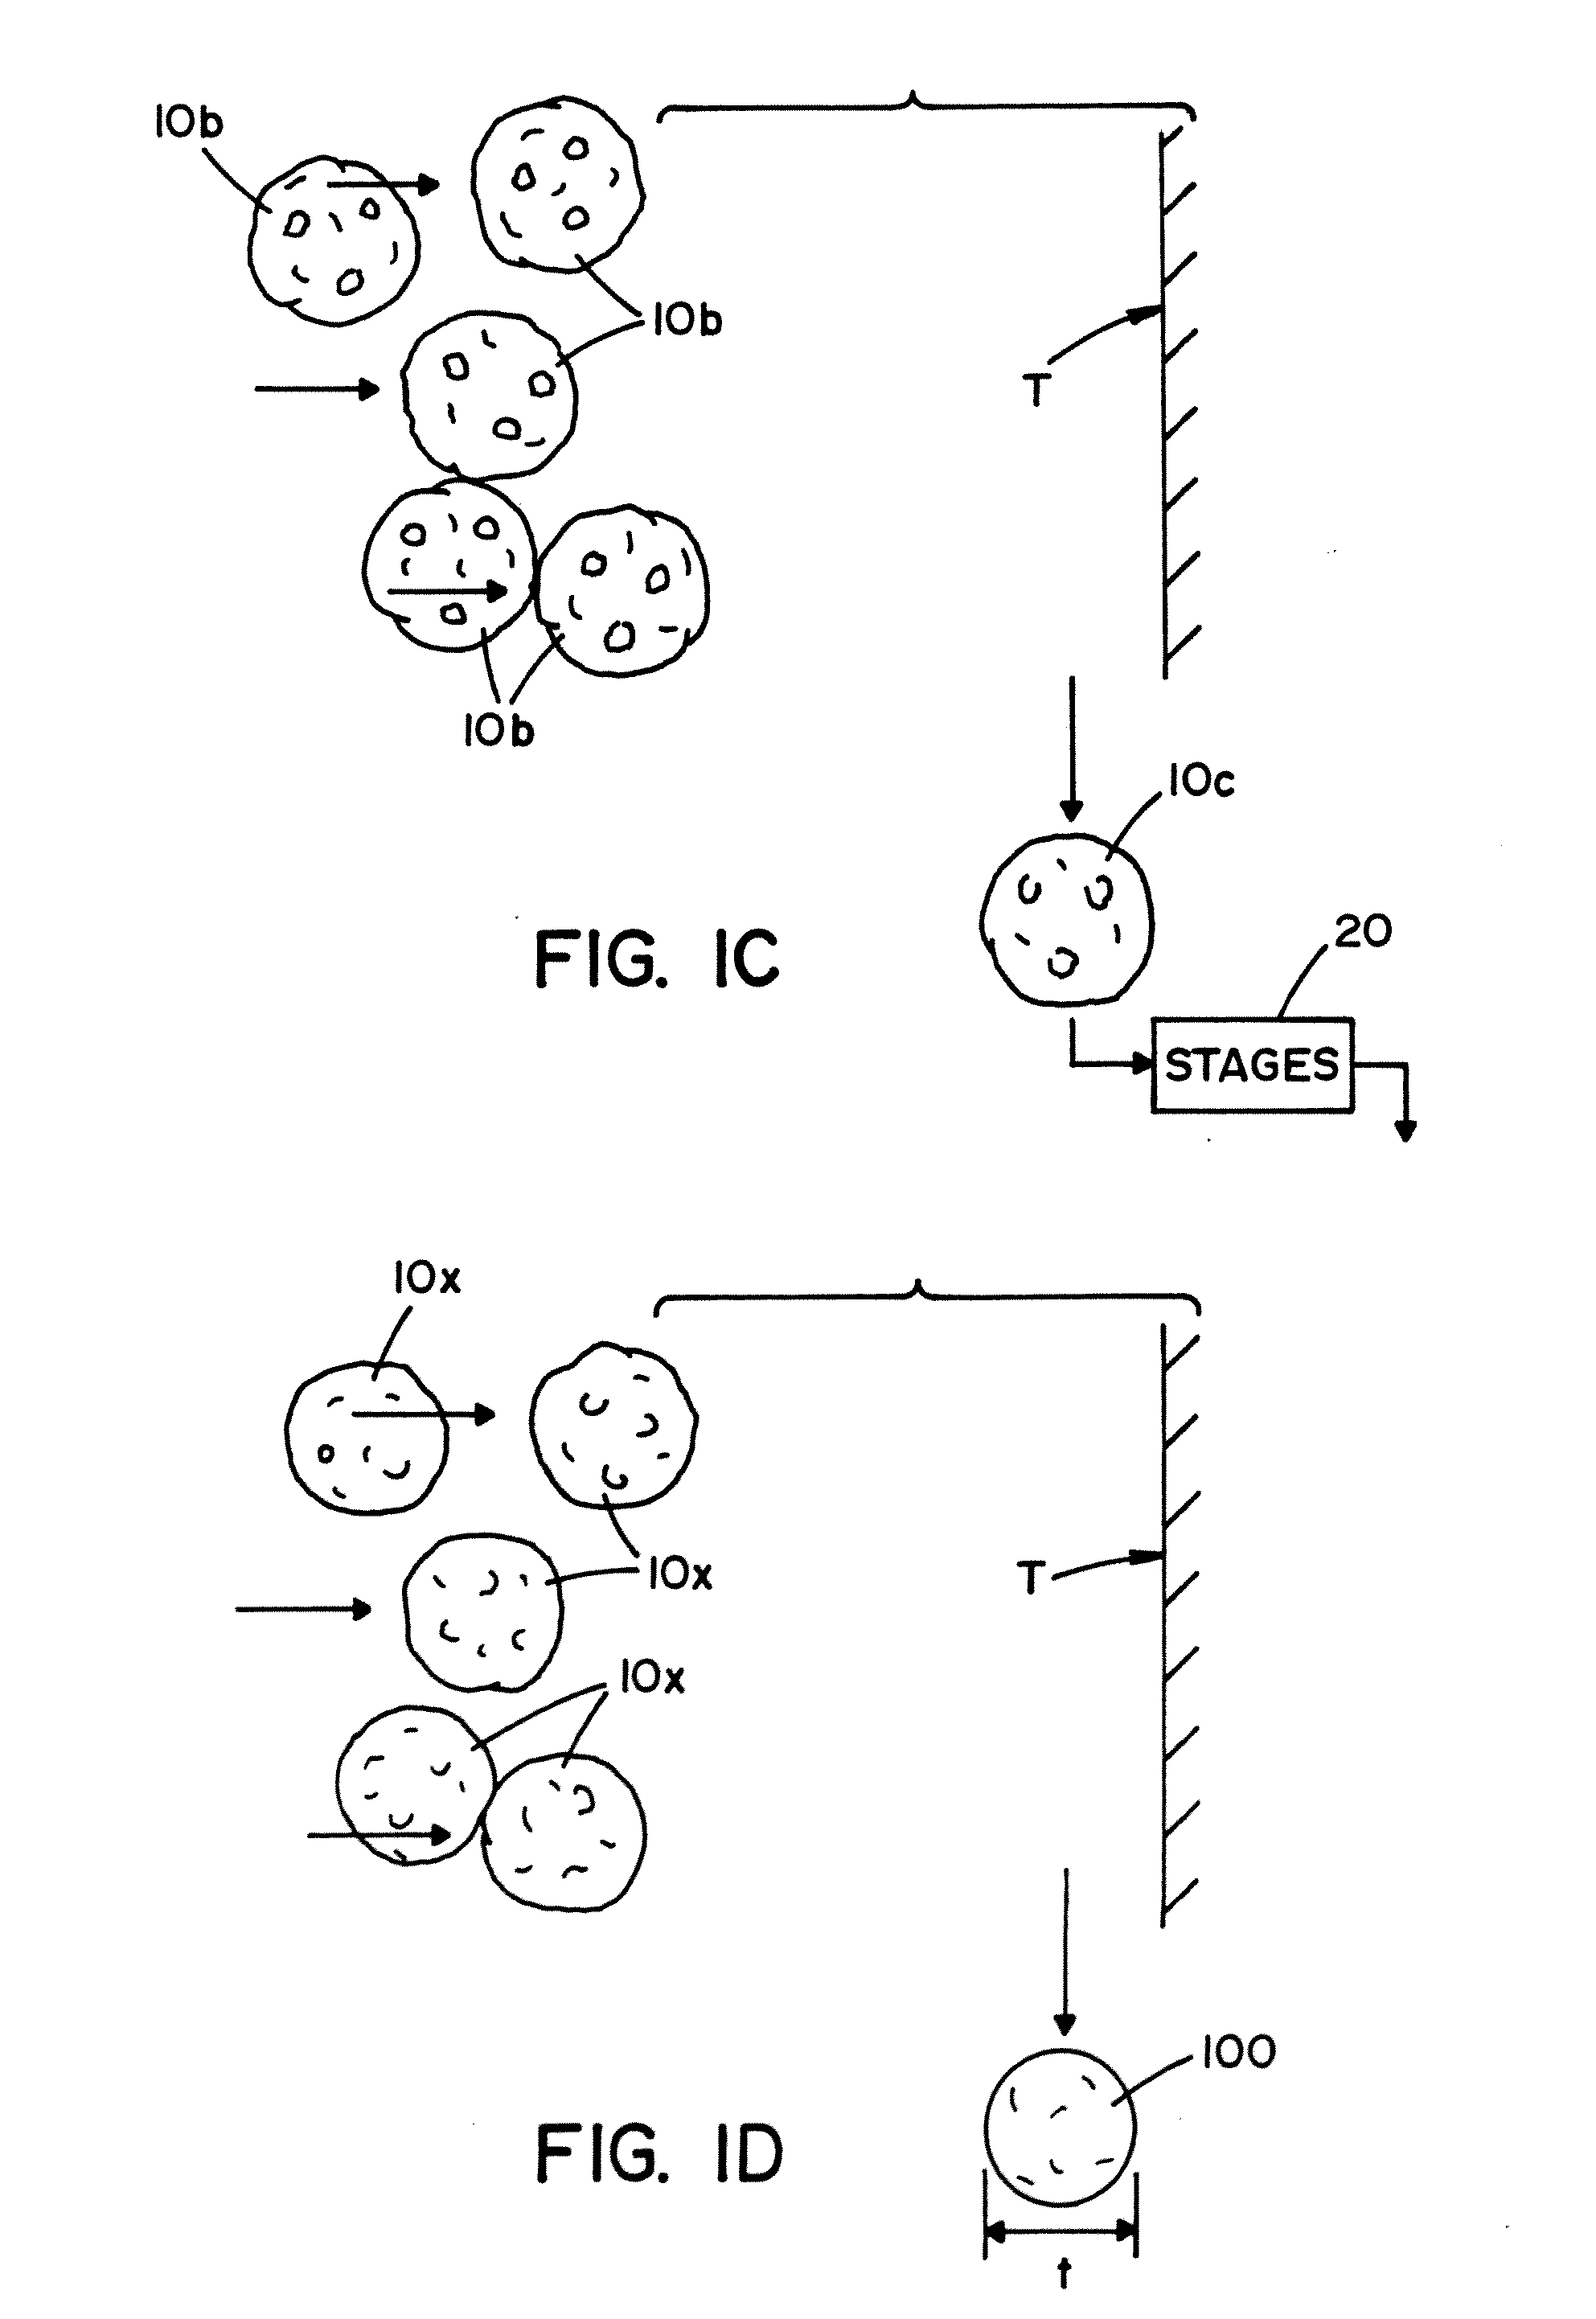 Method of making proppants used in gas or oil extraction